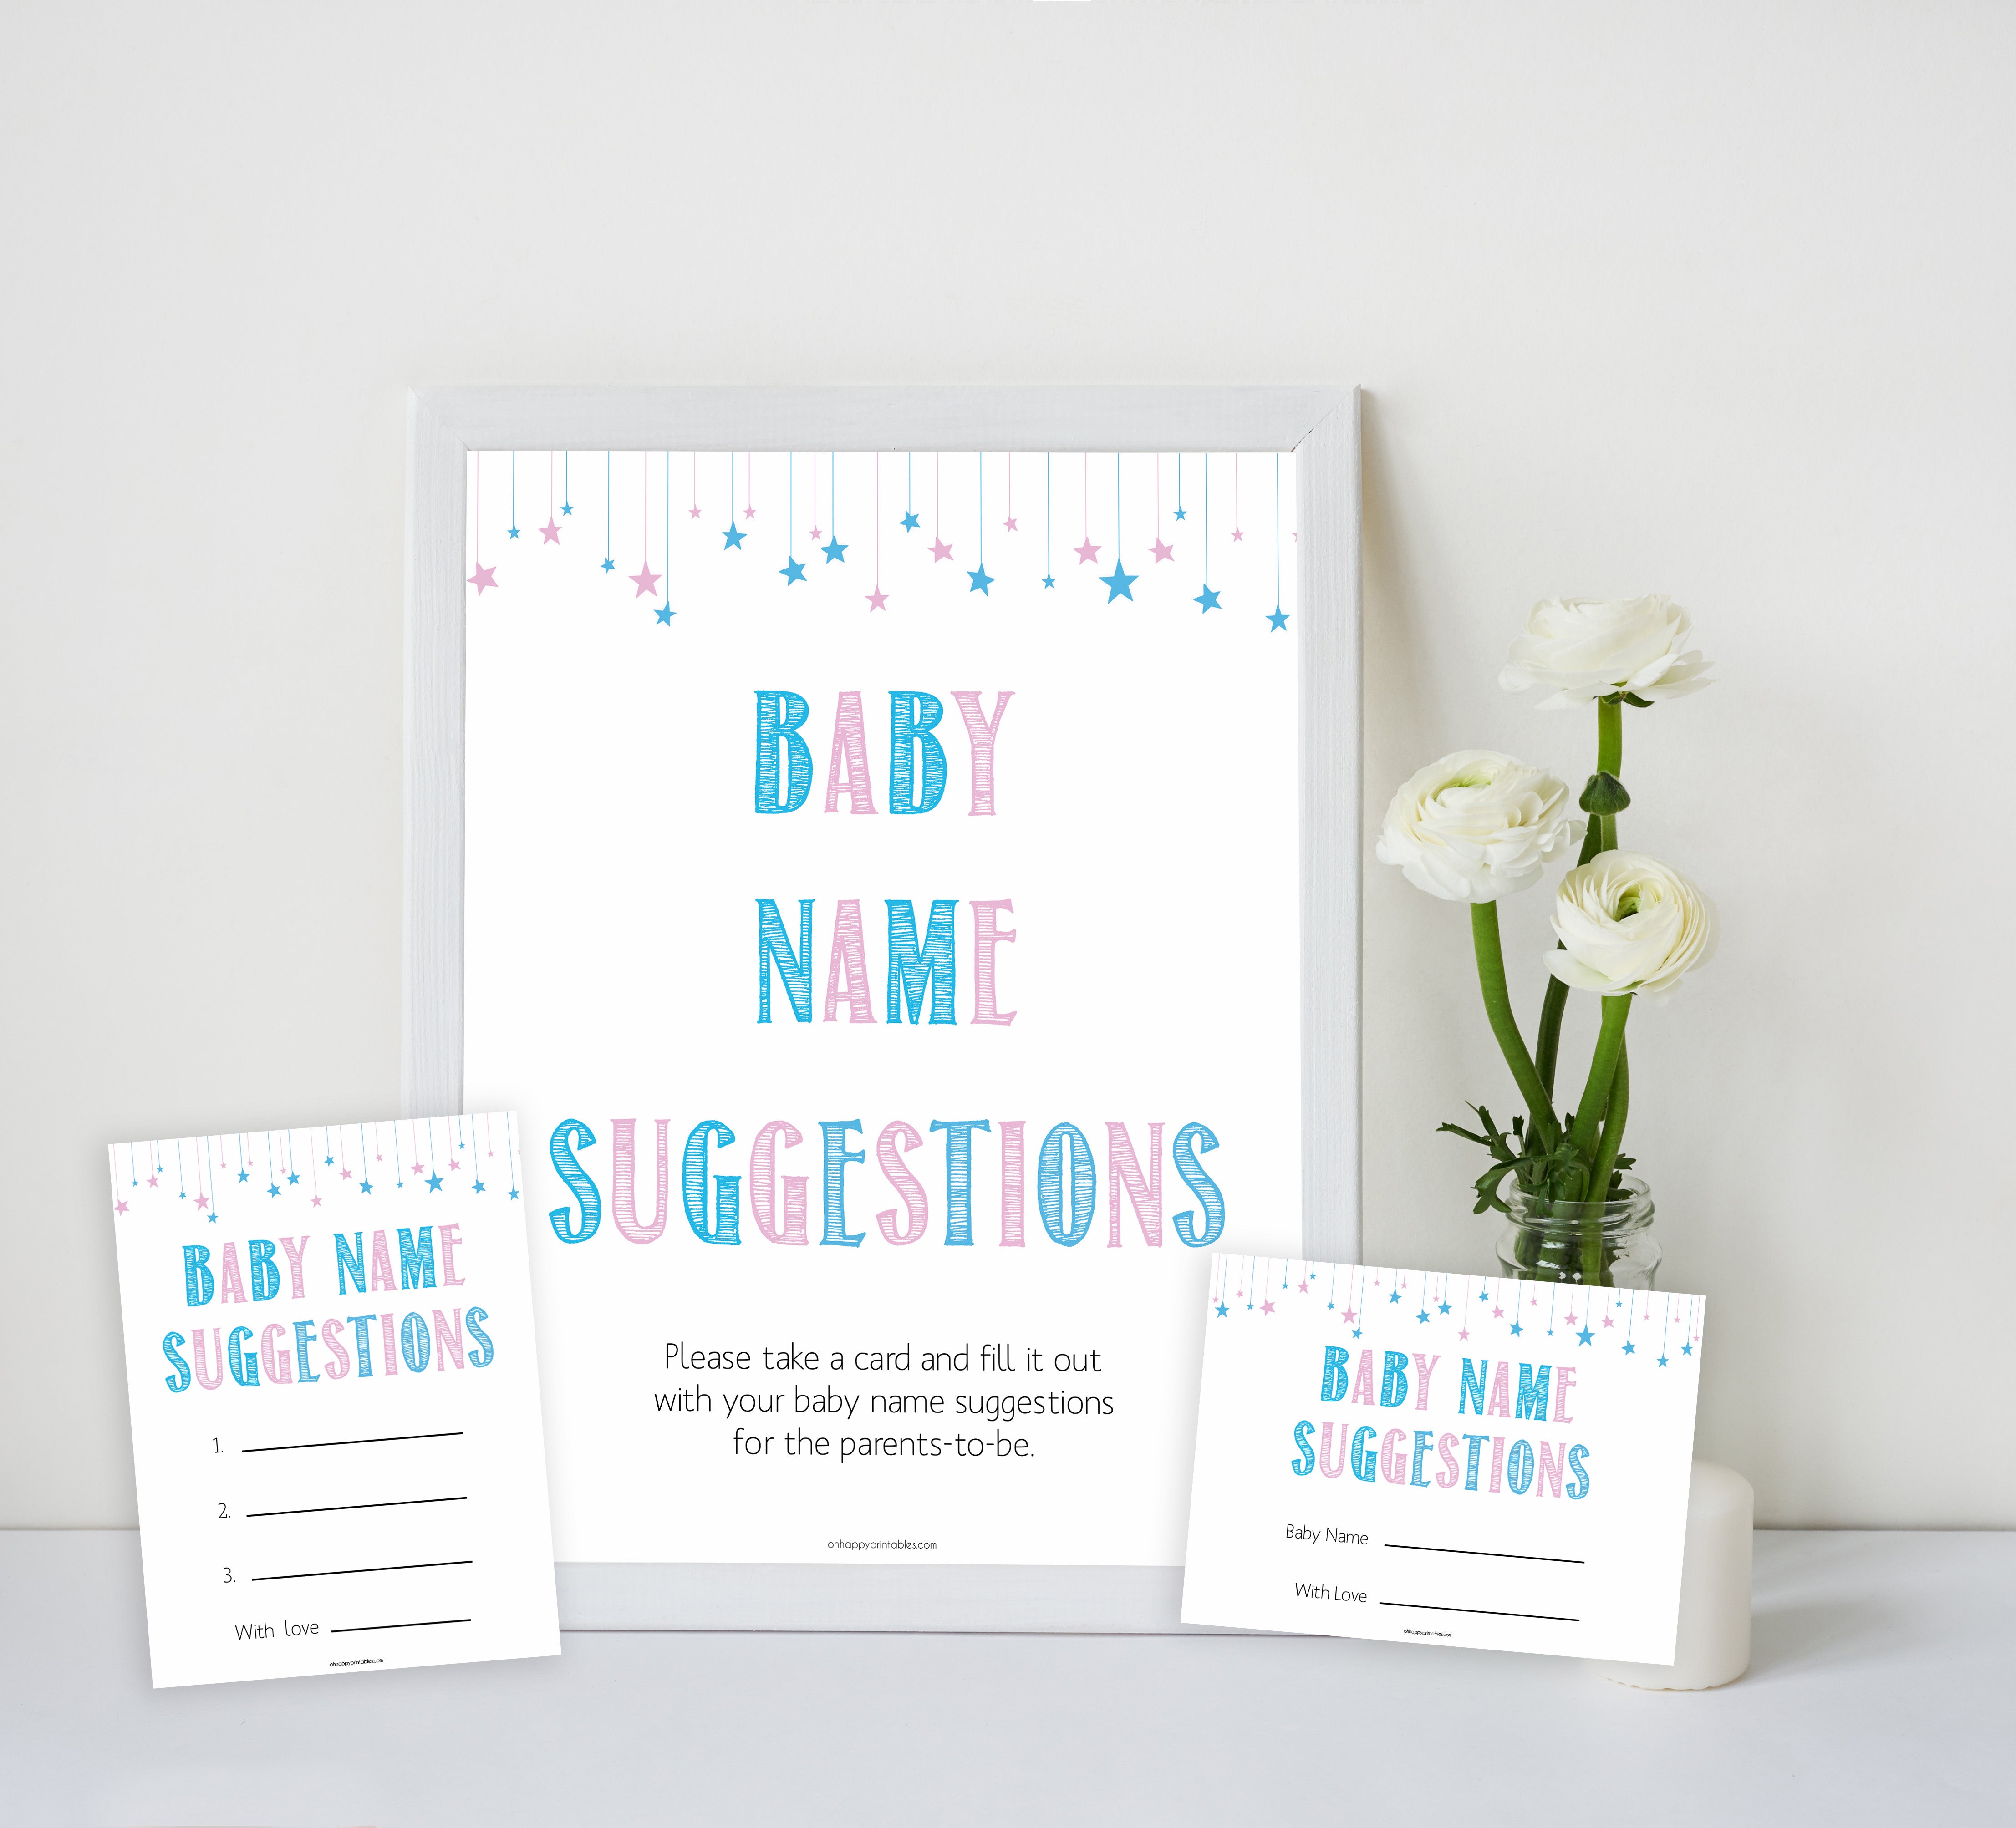 Gender reveal baby games, baby name suggestions baby game, gender reveal shower, fun baby games, gender reveal ideas, popular baby games, best baby games, printable baby games, gender reveal baby games